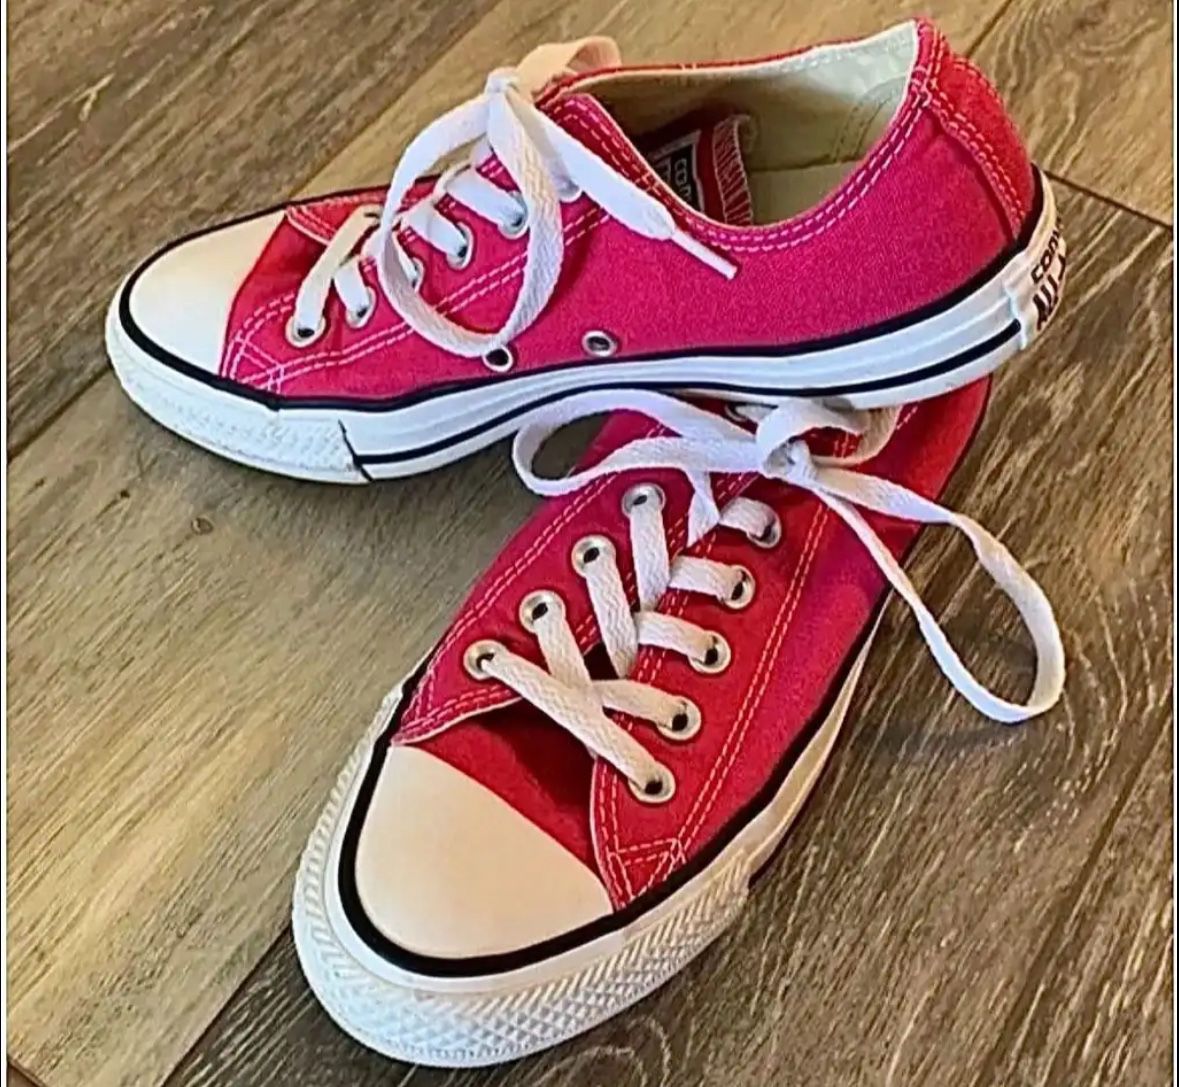 Chuck Taylor All Star Chaos Fuchsia/ Hot Pink Low Top Converse Sneakers (Like New)